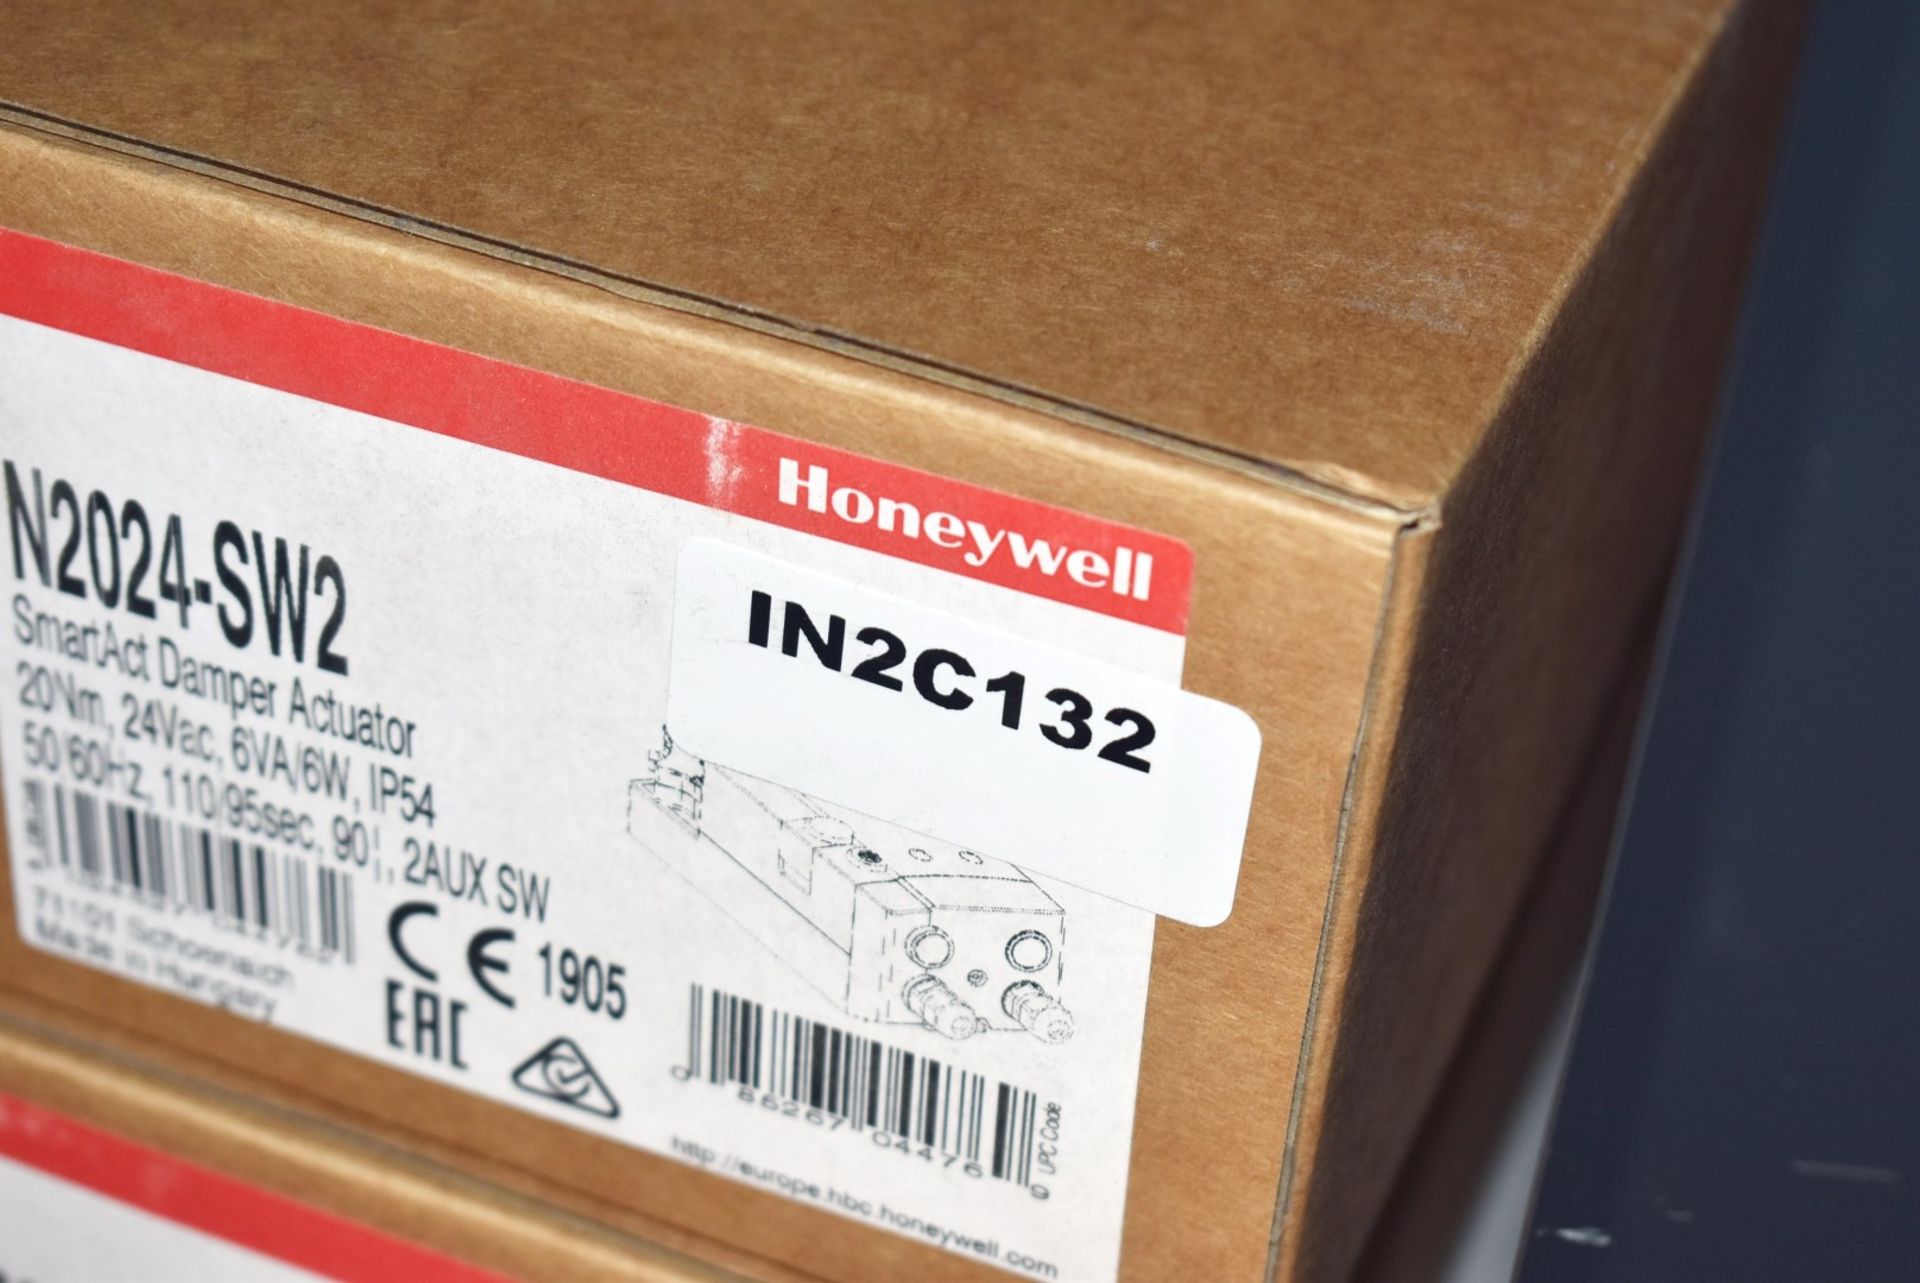 1 x Honeywell SmartAct Damper Actuator - Type N2024-SW2 - New Boxed Stock - RRP £225 - Image 3 of 3